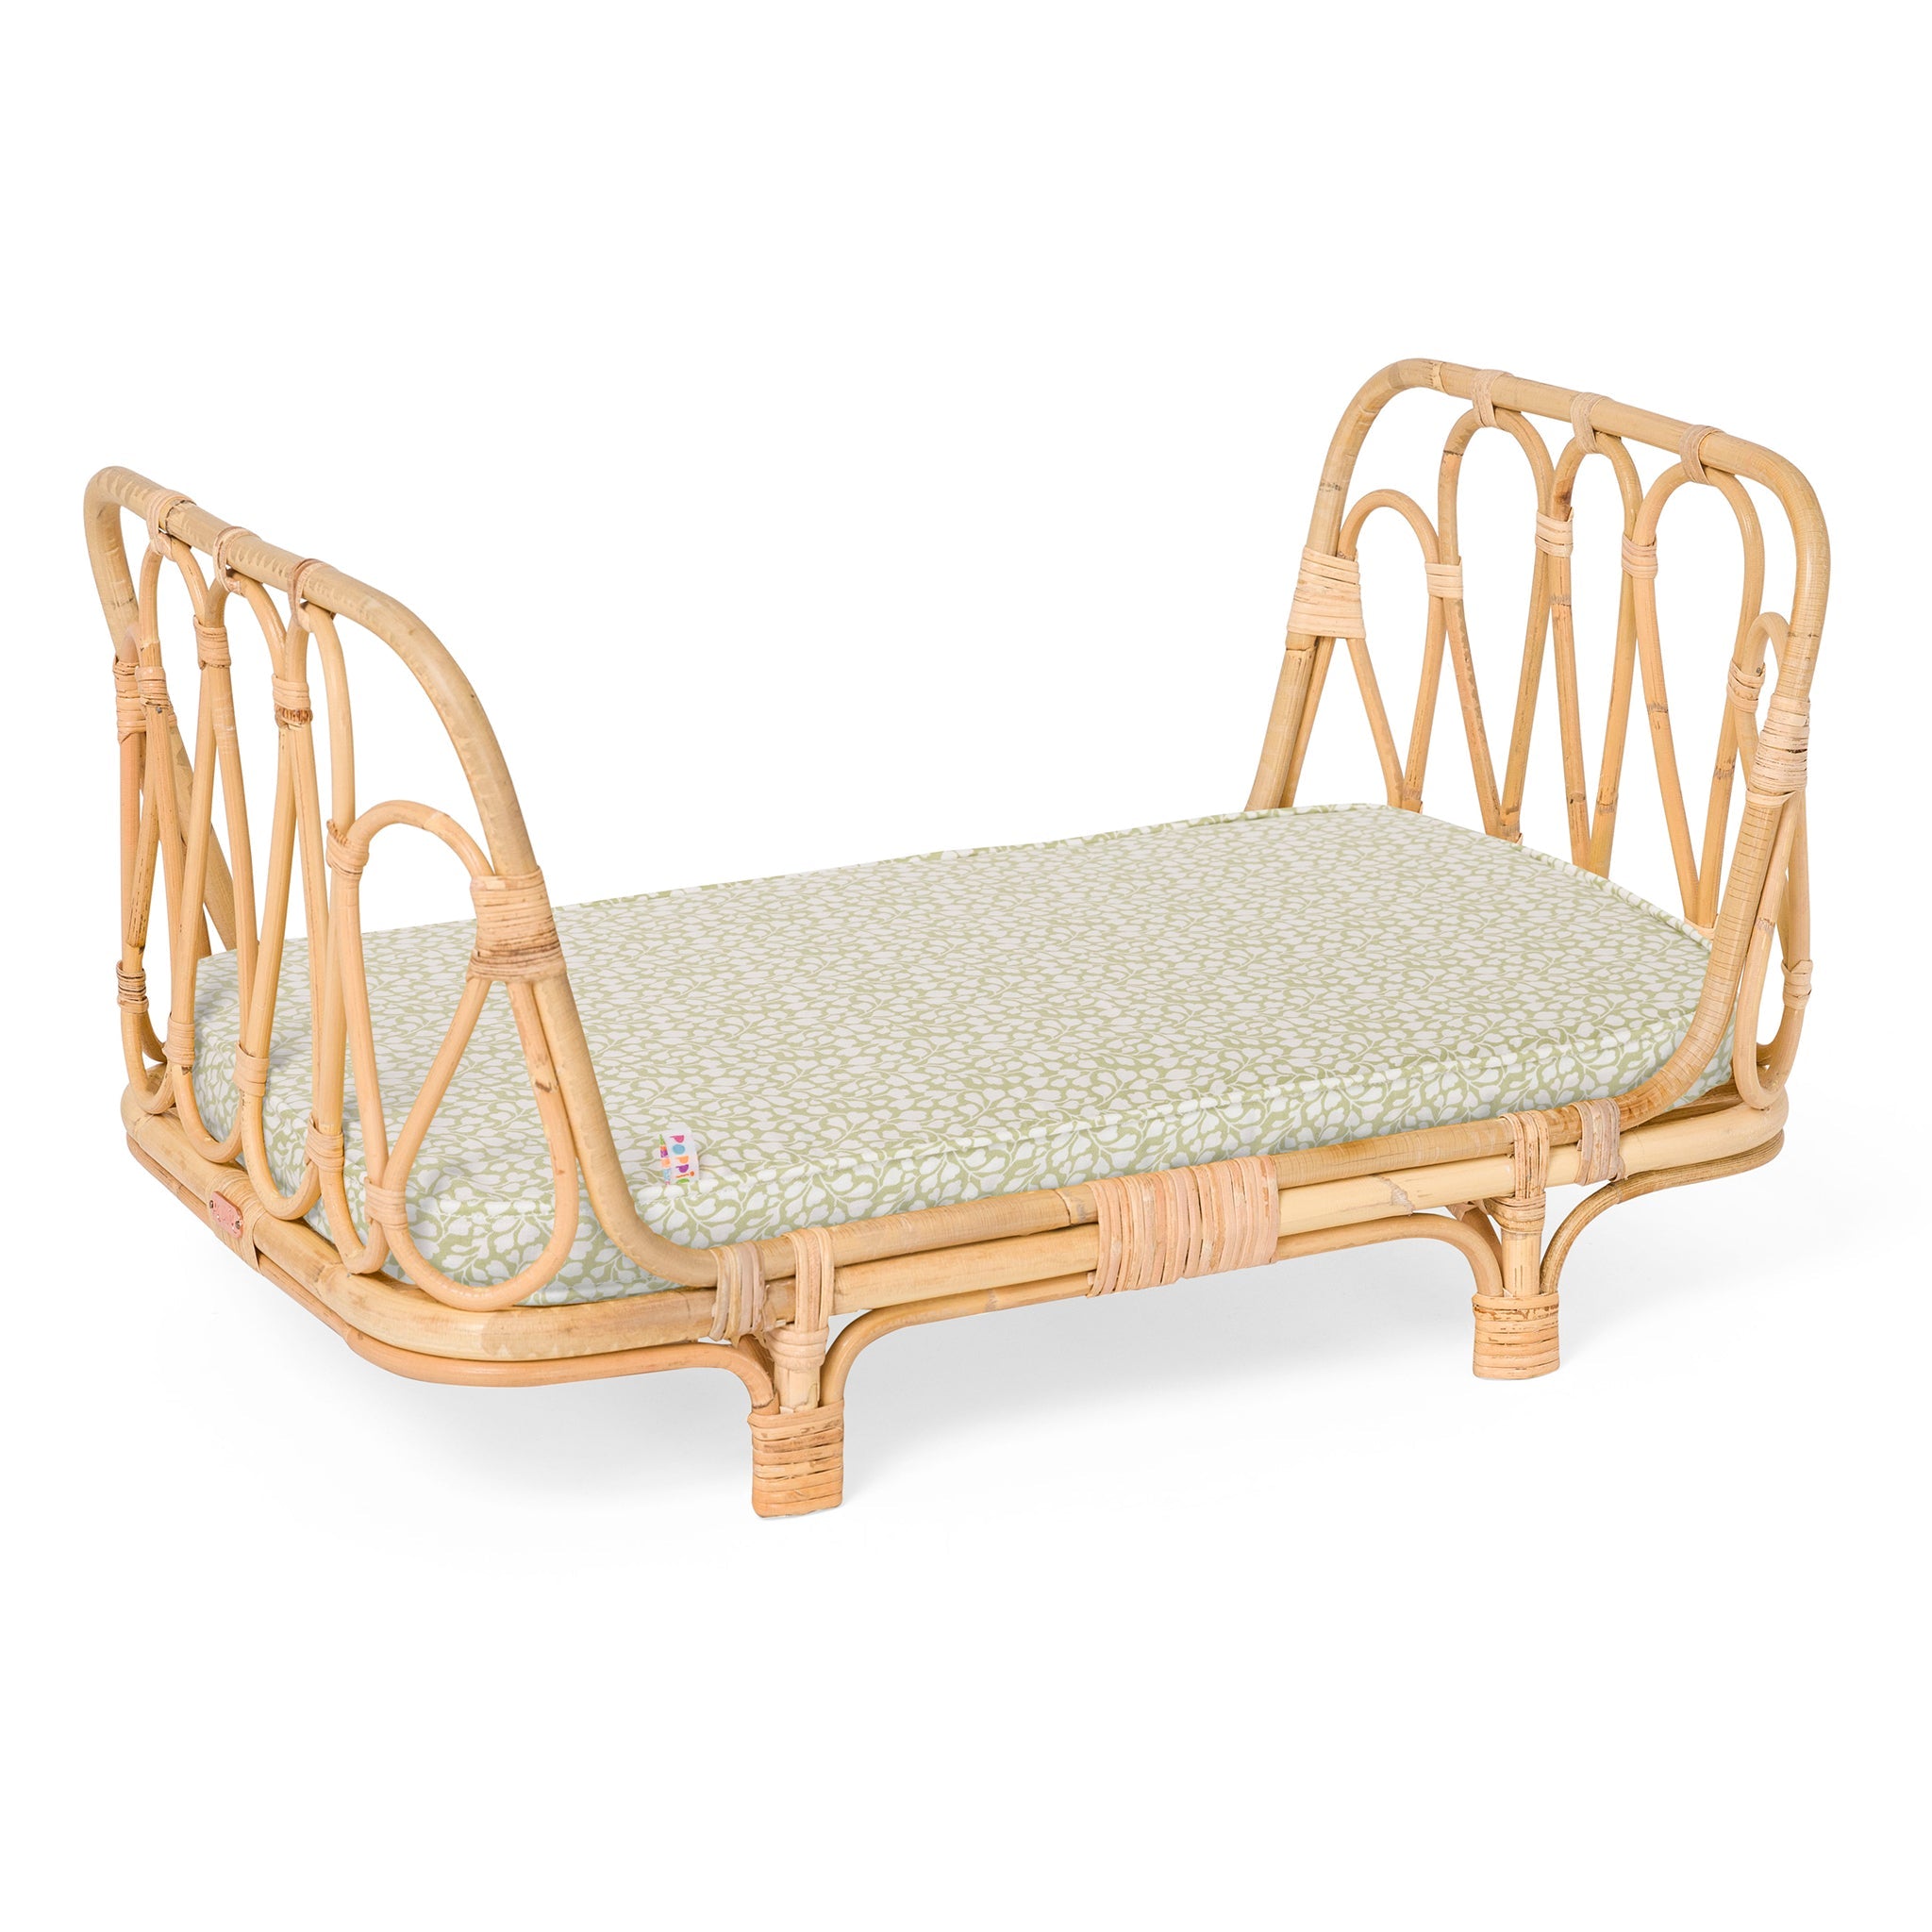 Poppie Toys Poppie Day Bed Signature Collection Olive Leaves